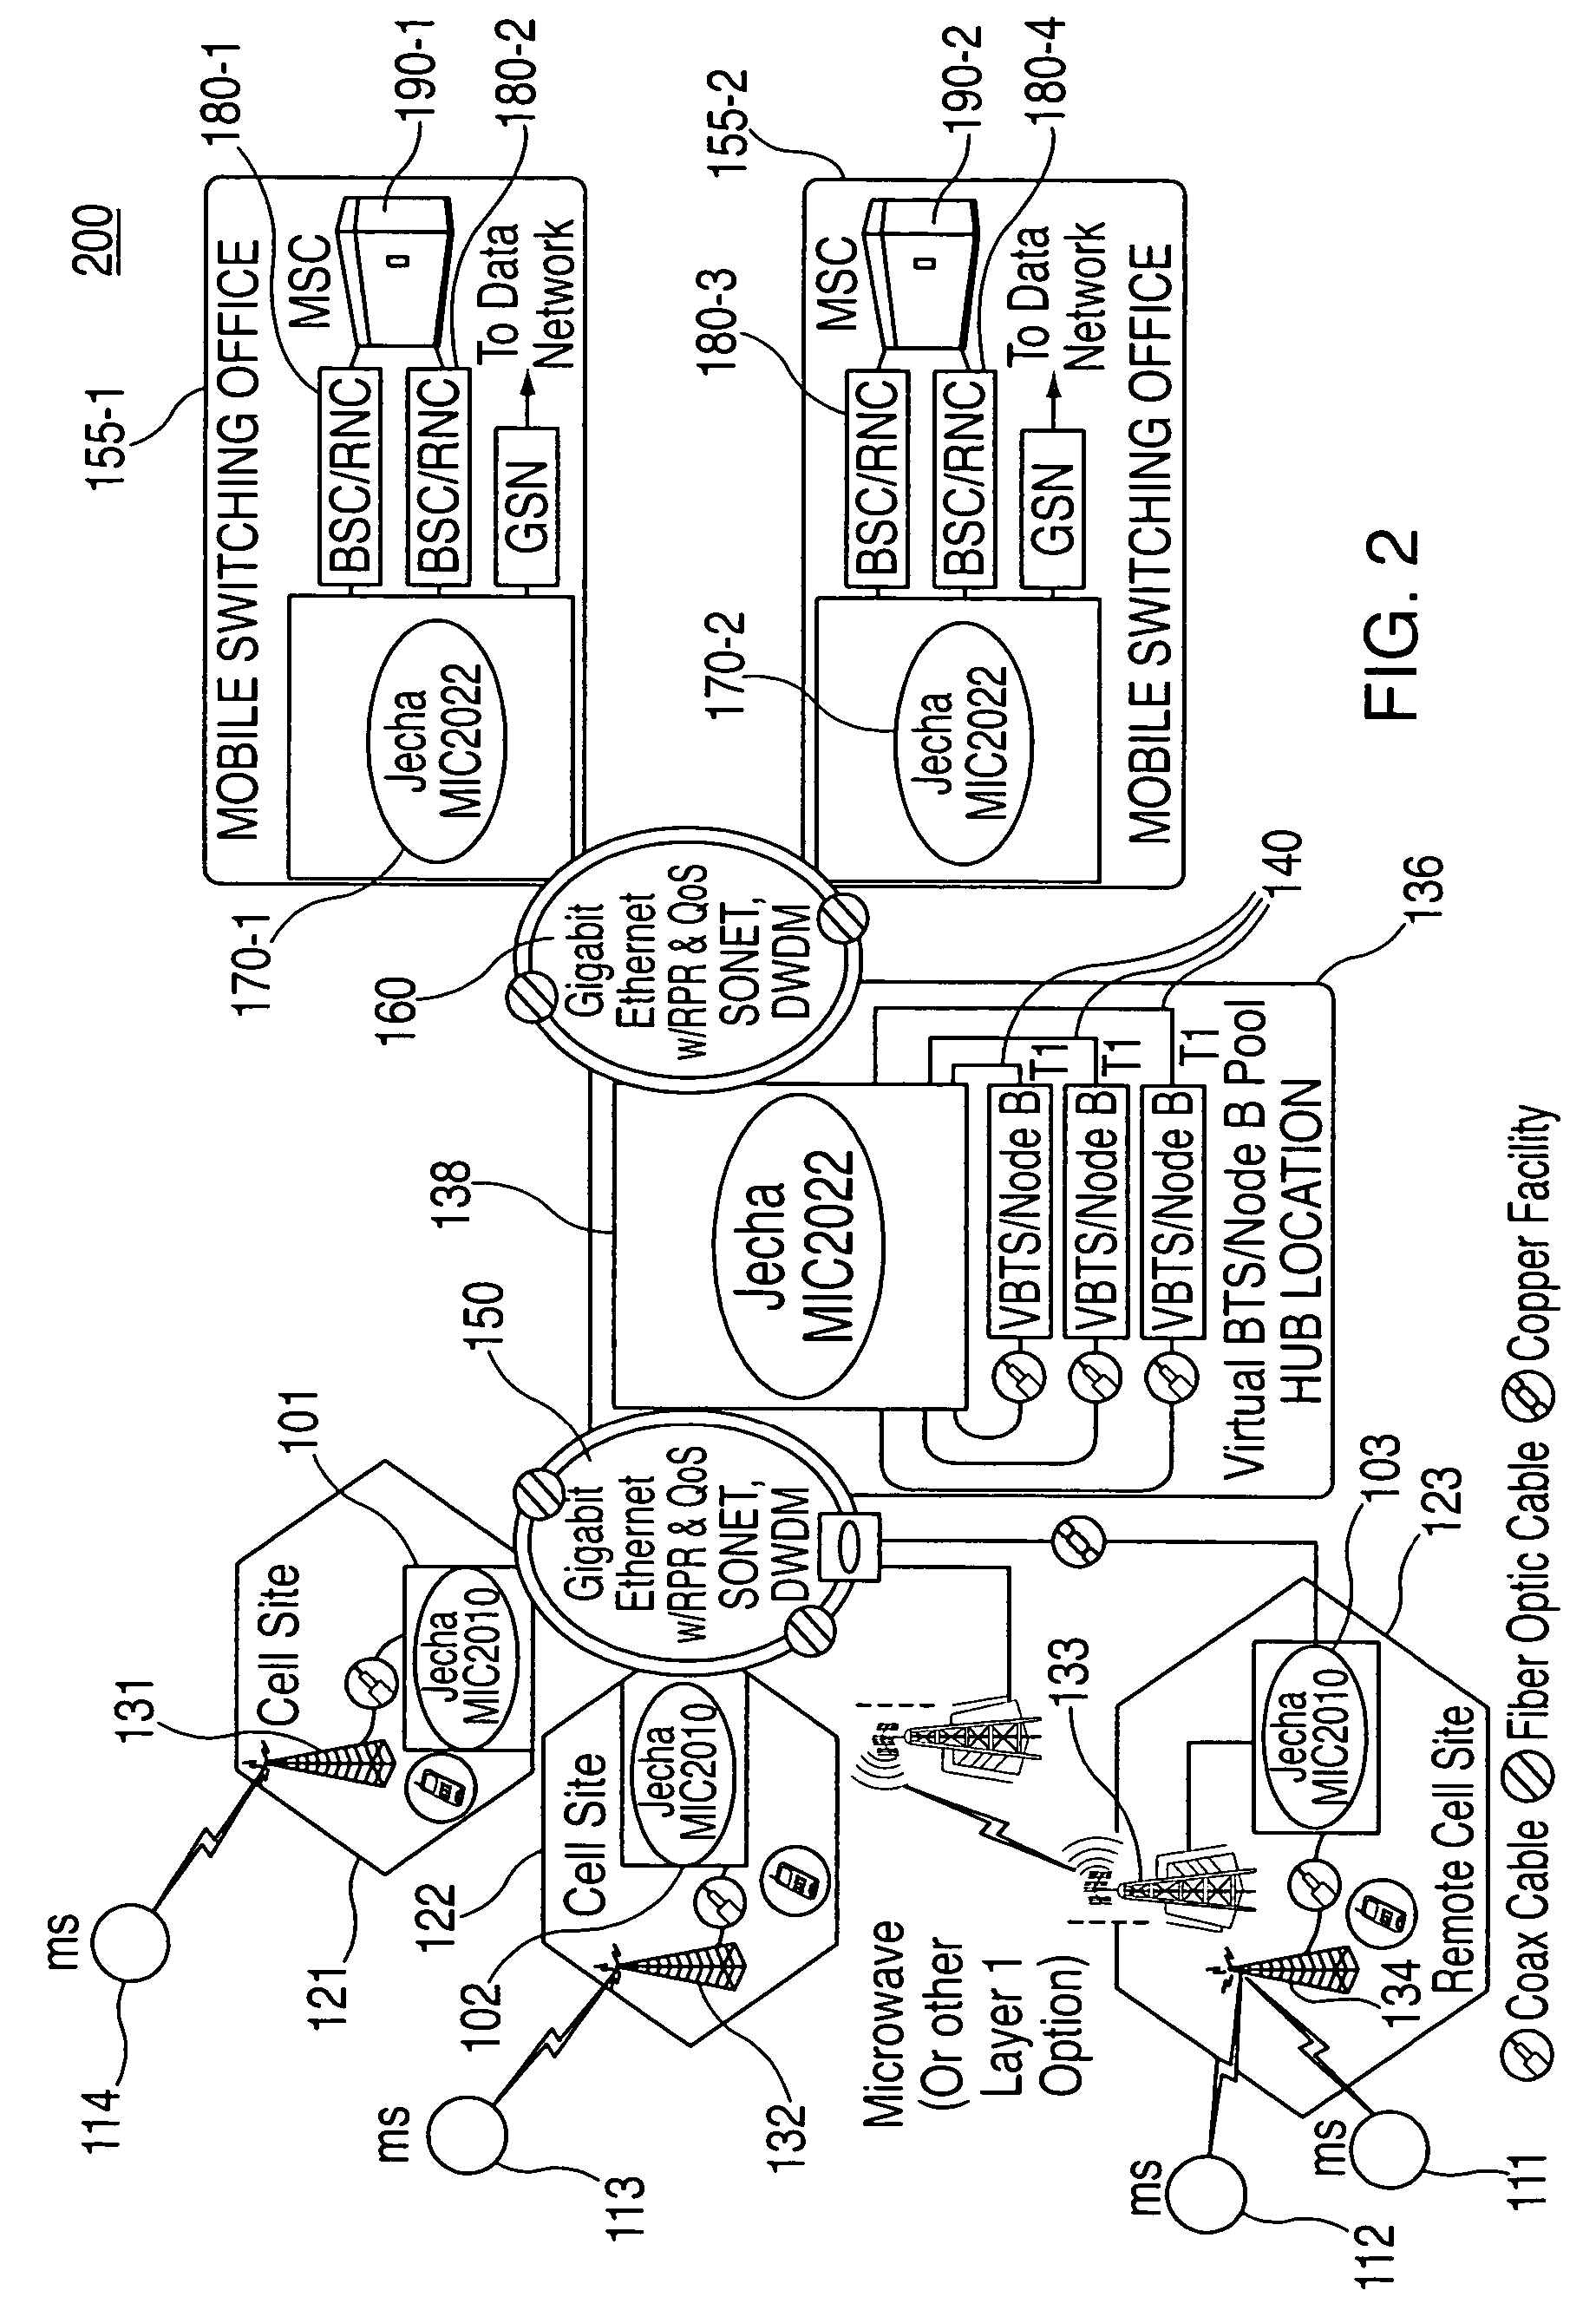 System and method for optimizing network capacity in a cellular wireless network